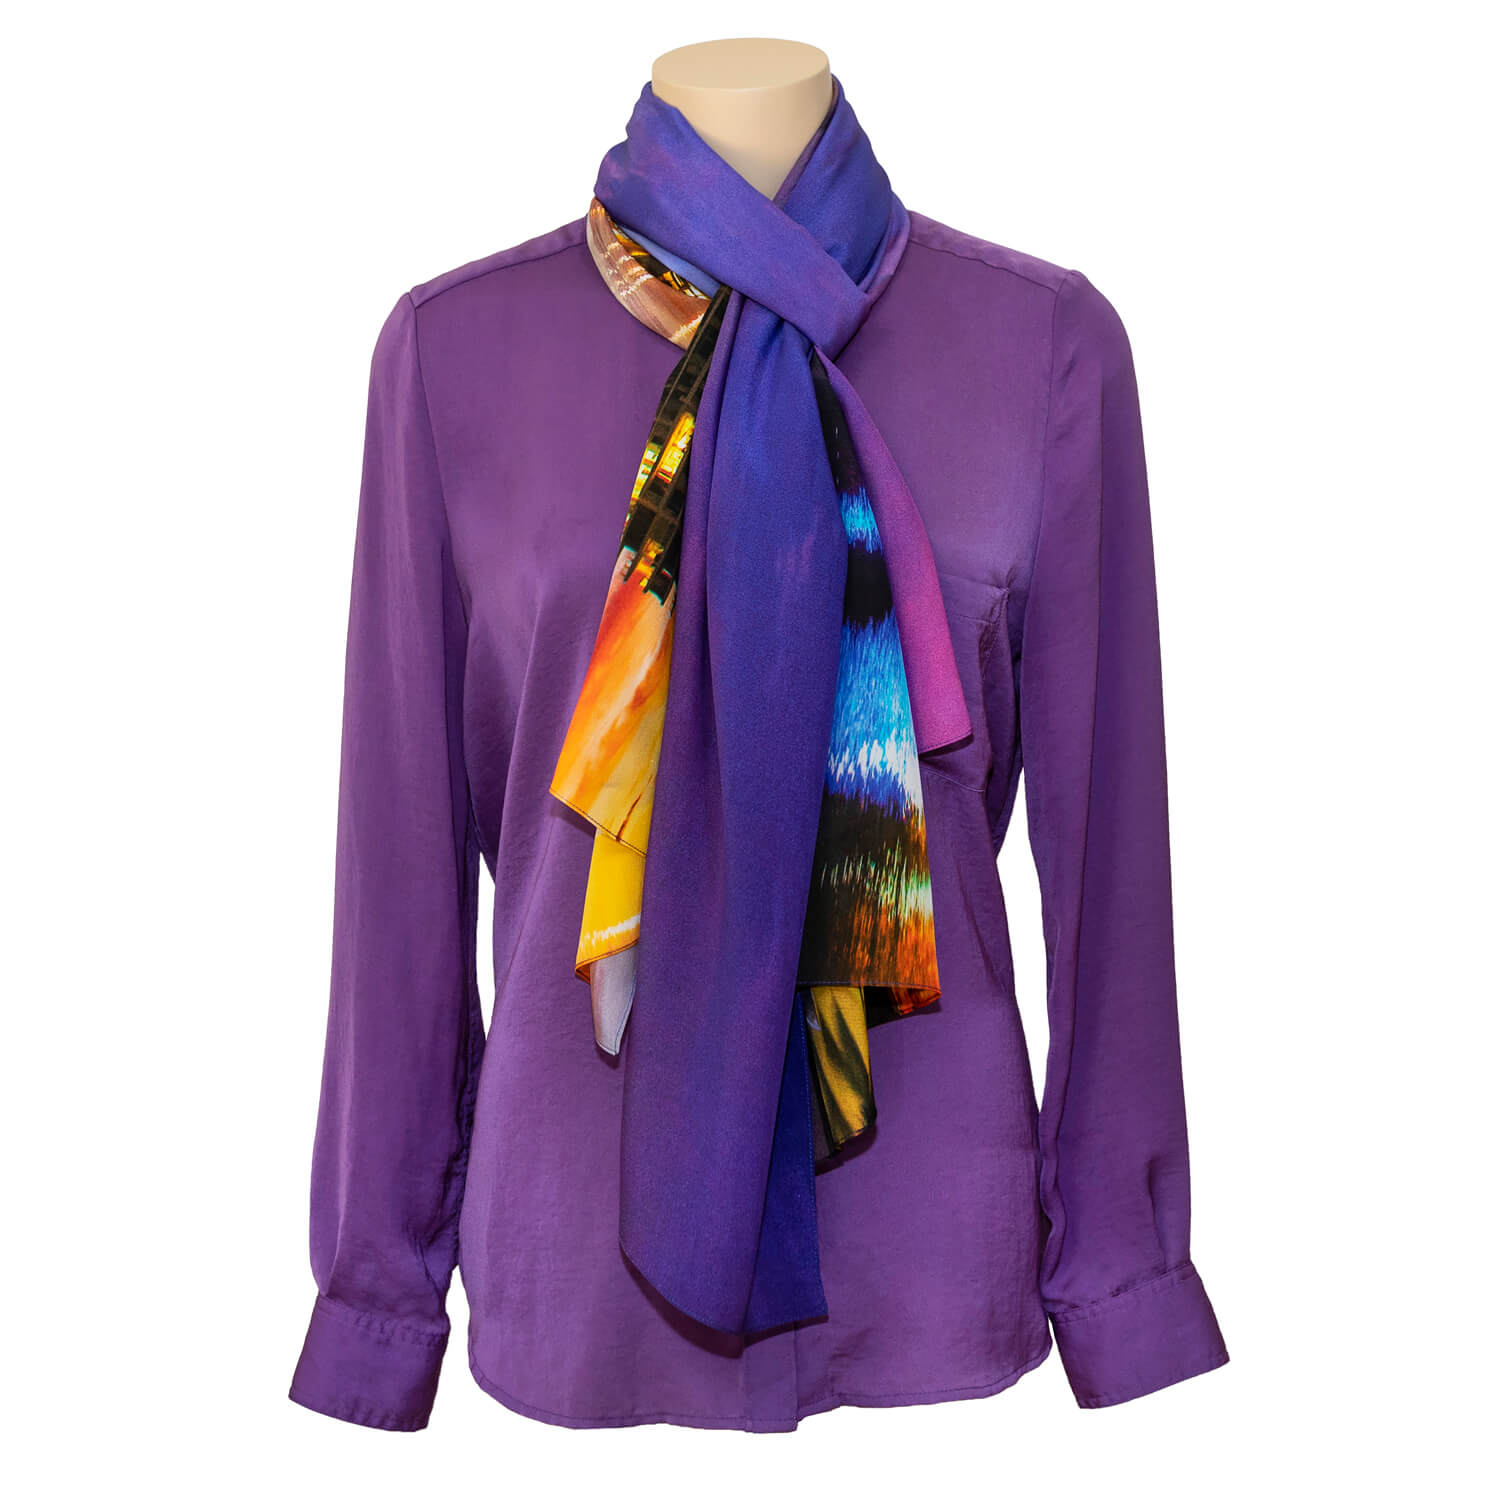 dusk on the inlet silk scarf with purple shirt